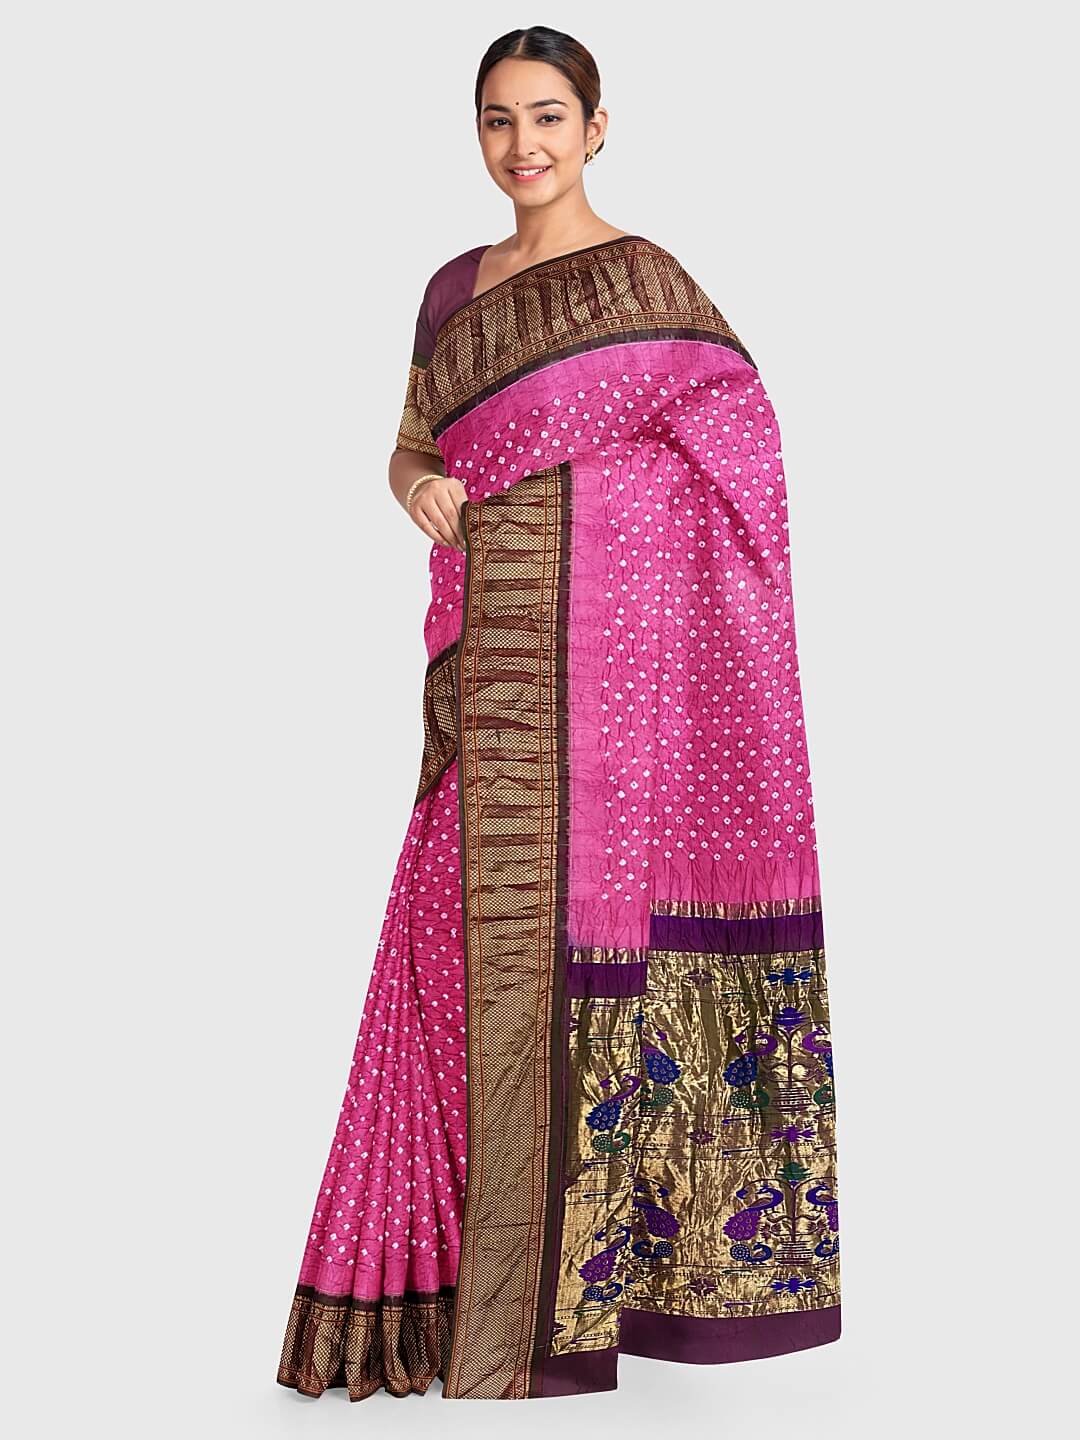 Buy Latest Collection of Chiffon Saree Online